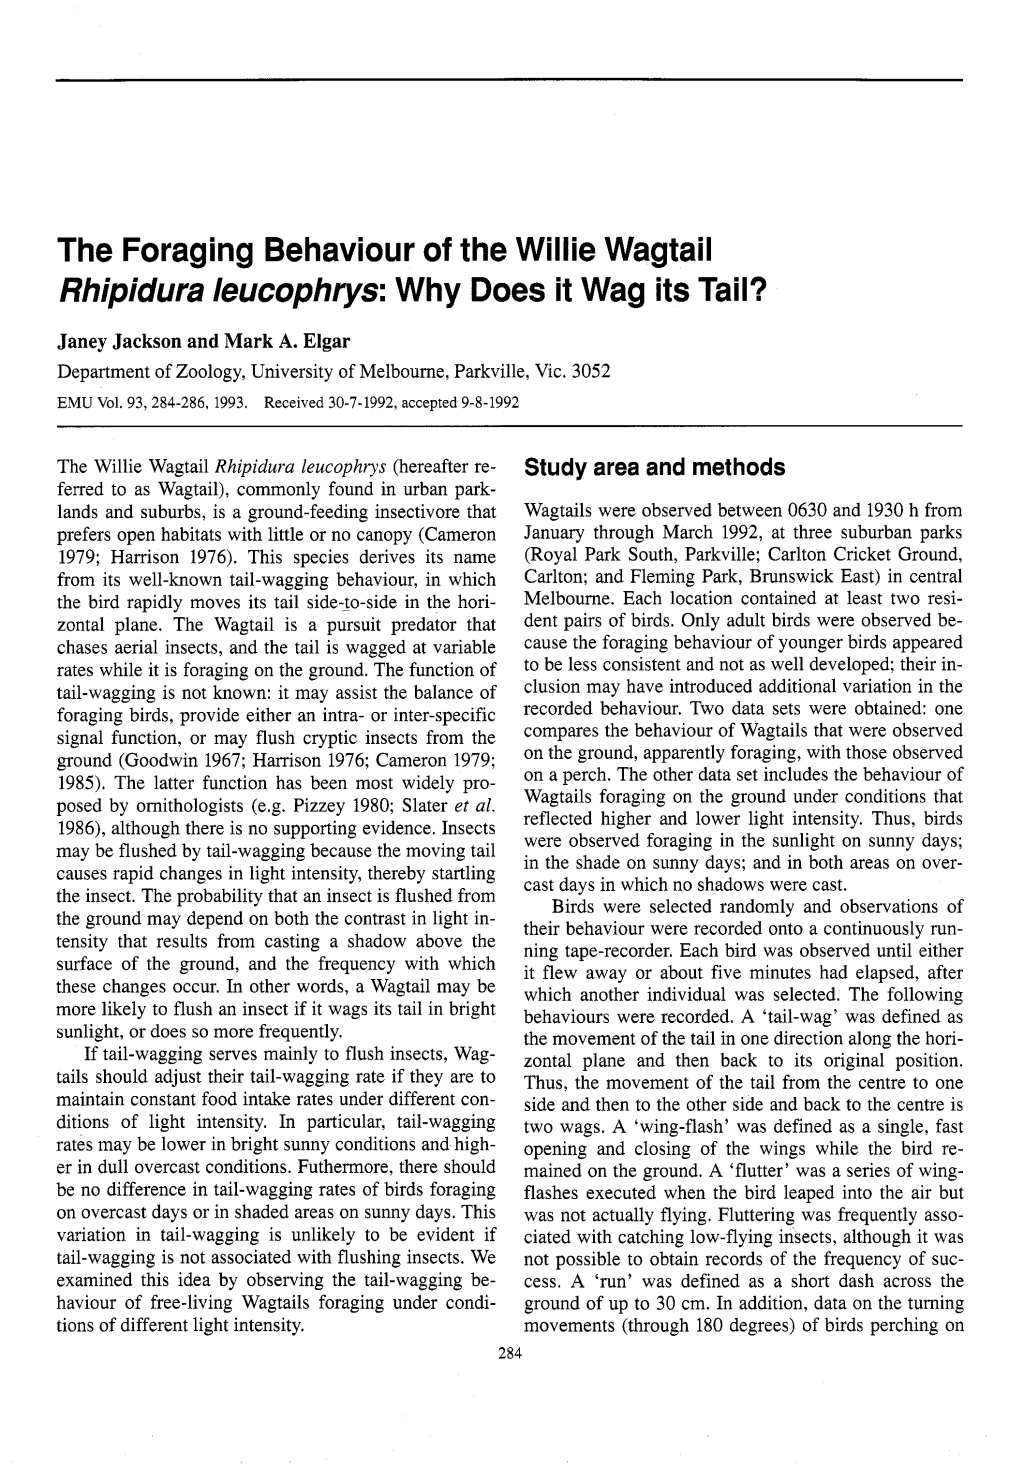 The Foraging Behaviour of the Willie Wagtail Rhipidura Leucophrys: Why Does It Wag Its Tail?